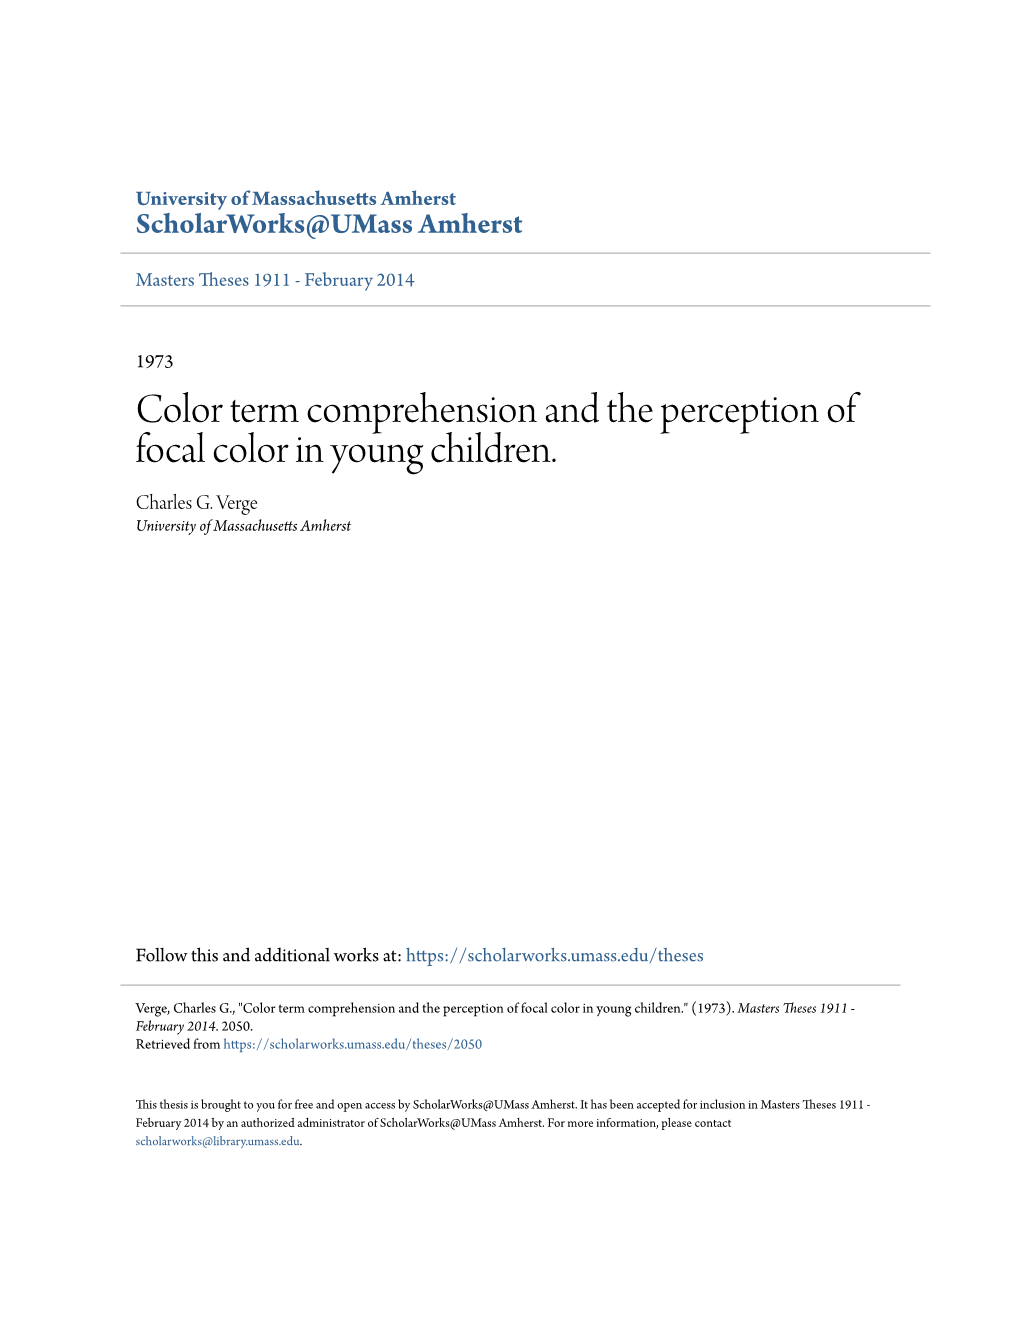 Color Term Comprehension and the Perception of Focal Color in Young Children